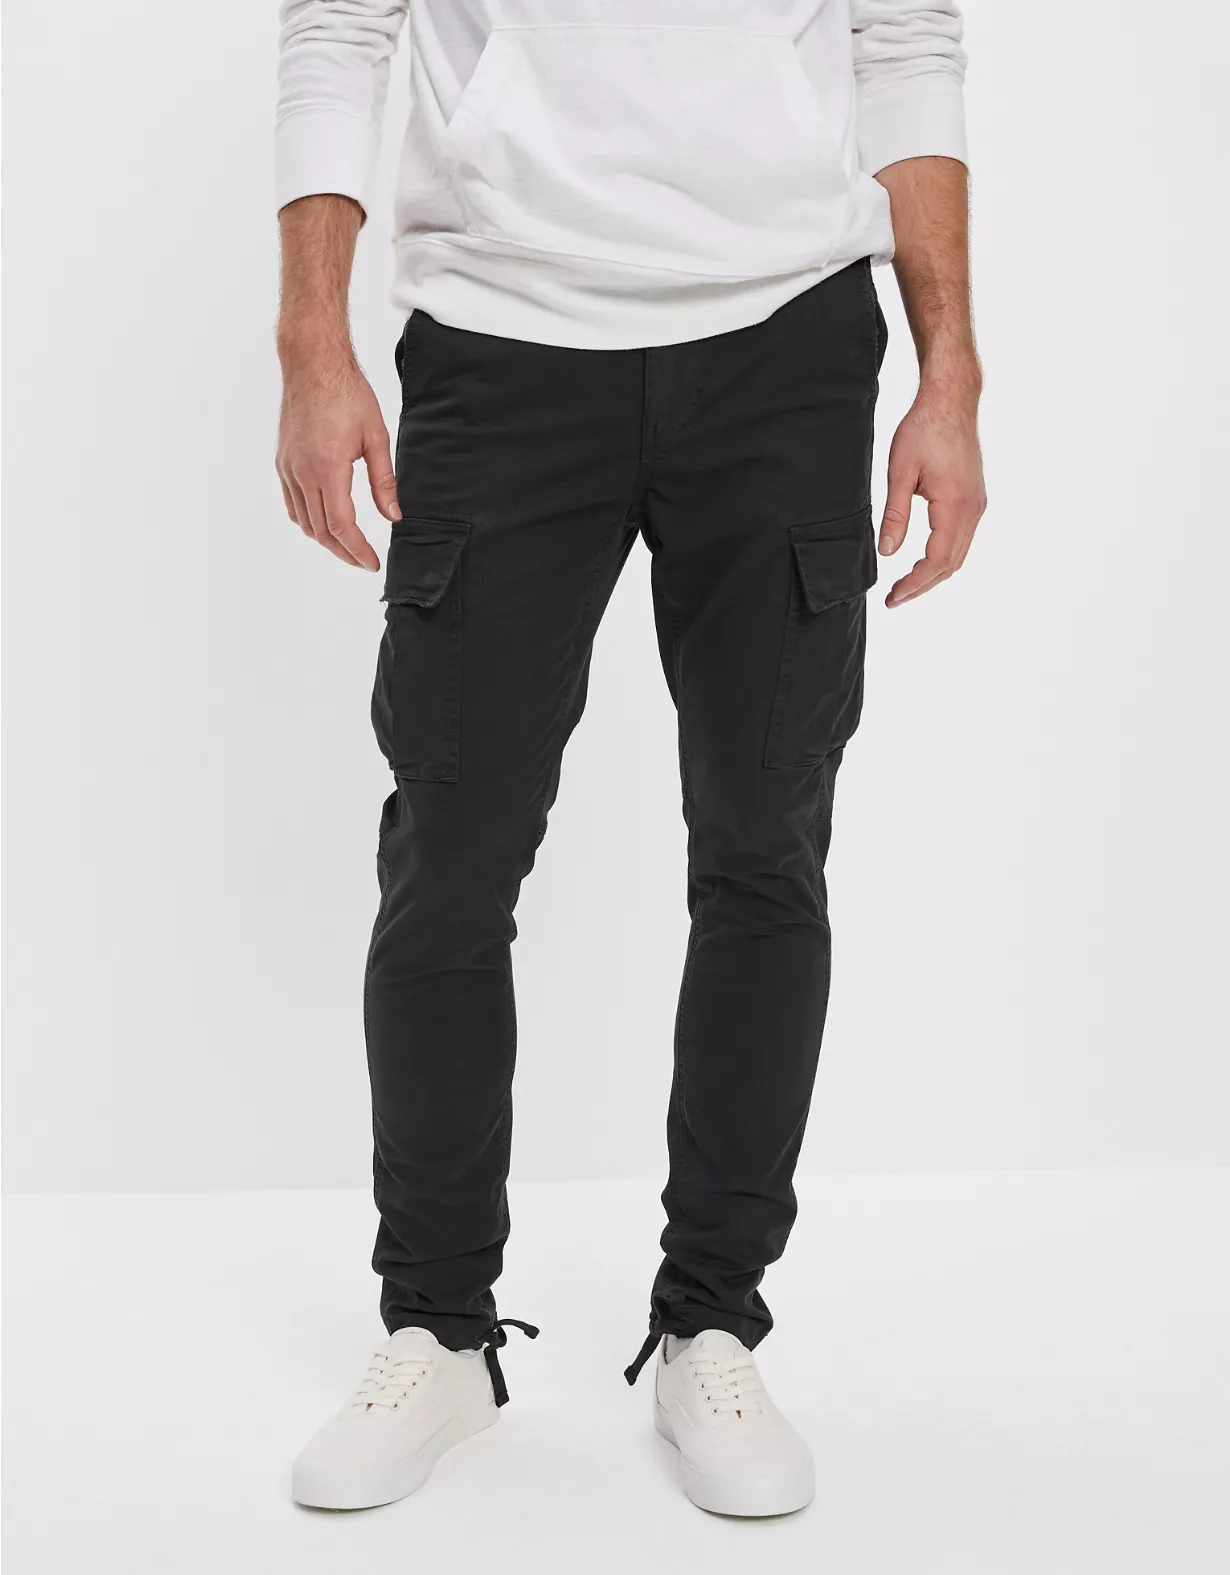 AE Flex Skinny Lived-In Cargo Pant